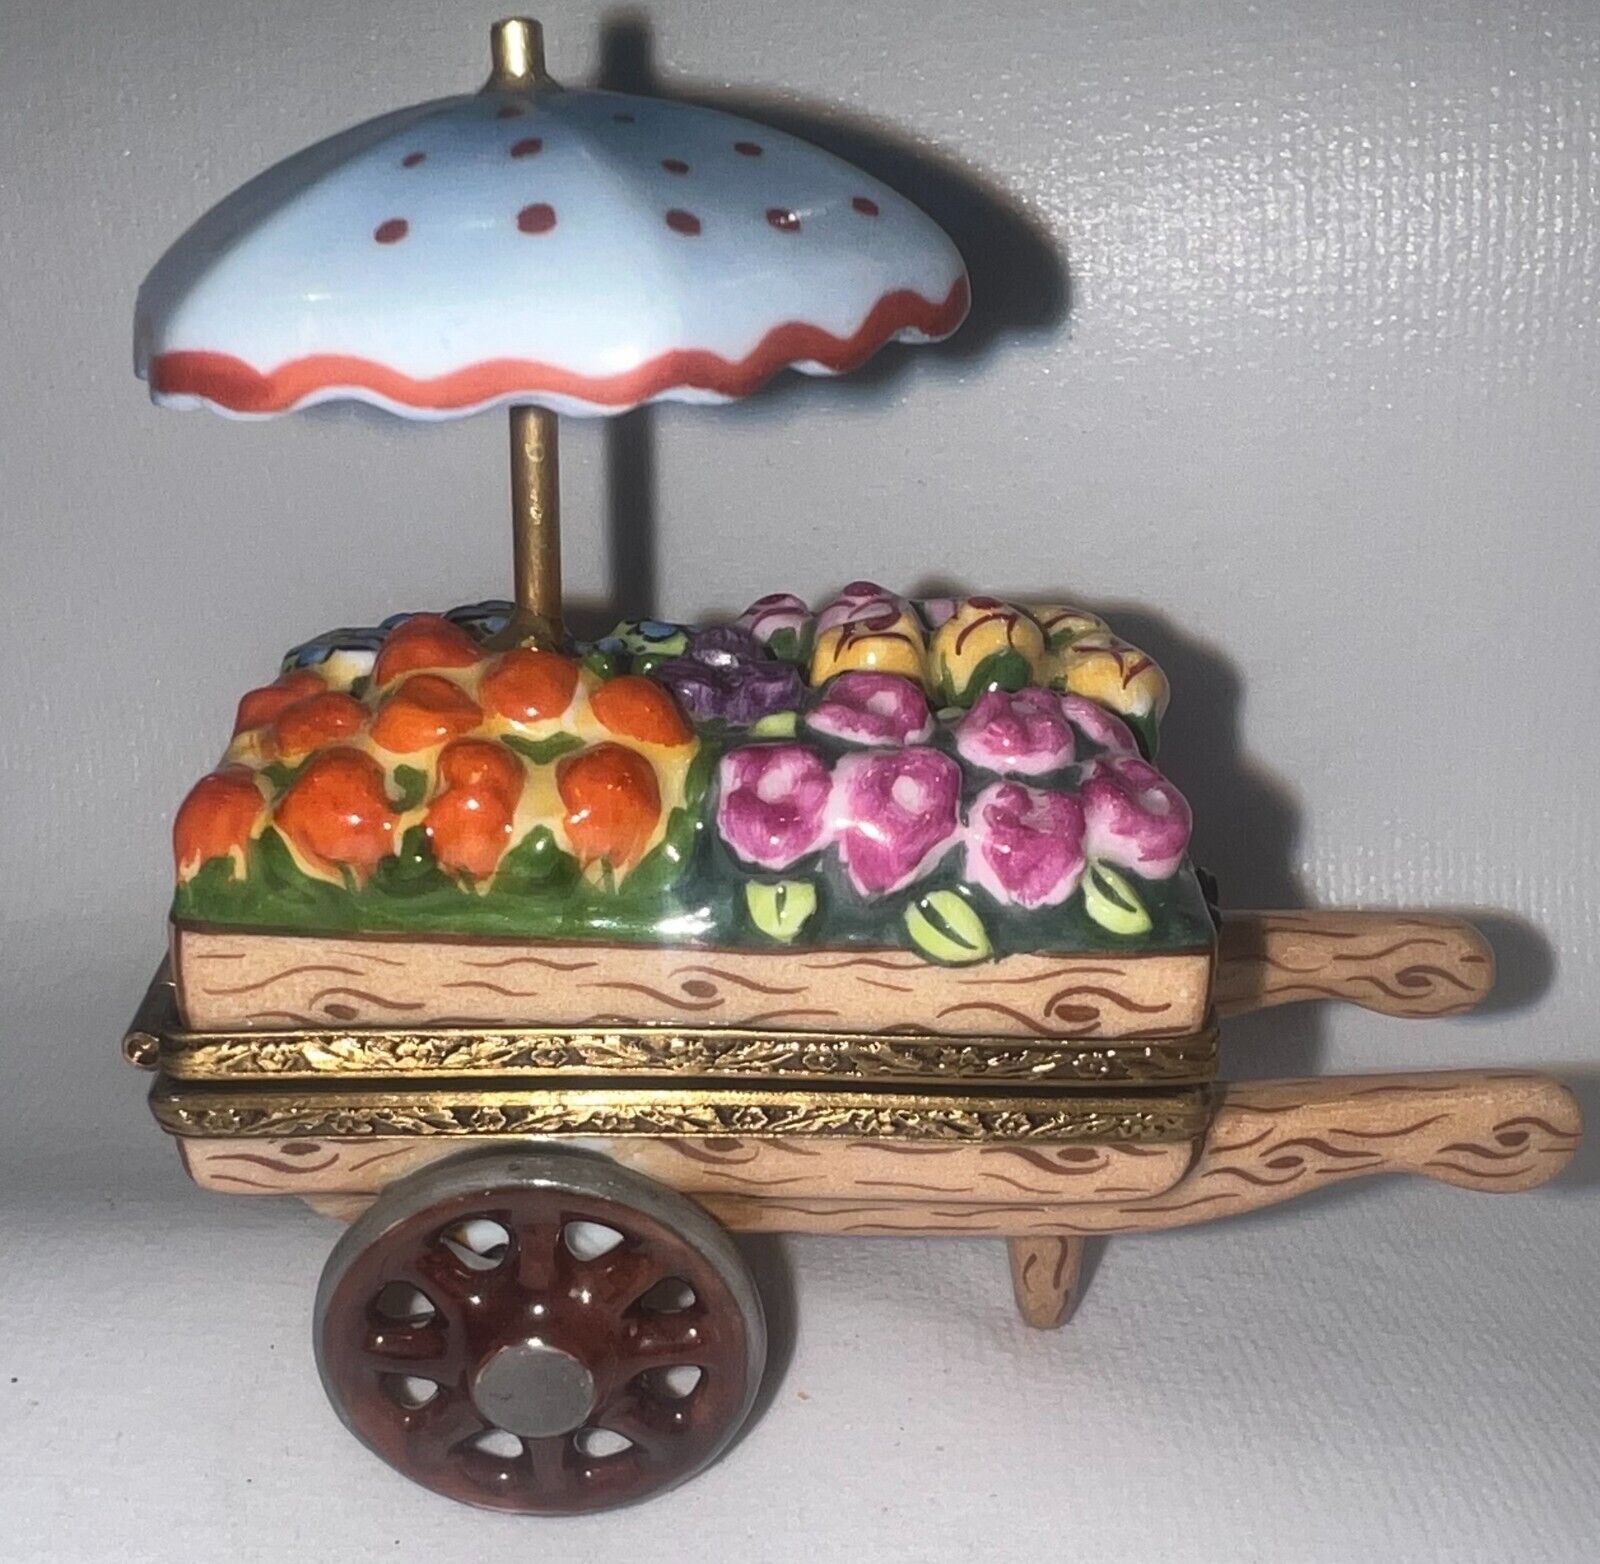 ROCHARD LIMOGES - FLOWER CART WITH UMBRELLA - SIGNED BOX